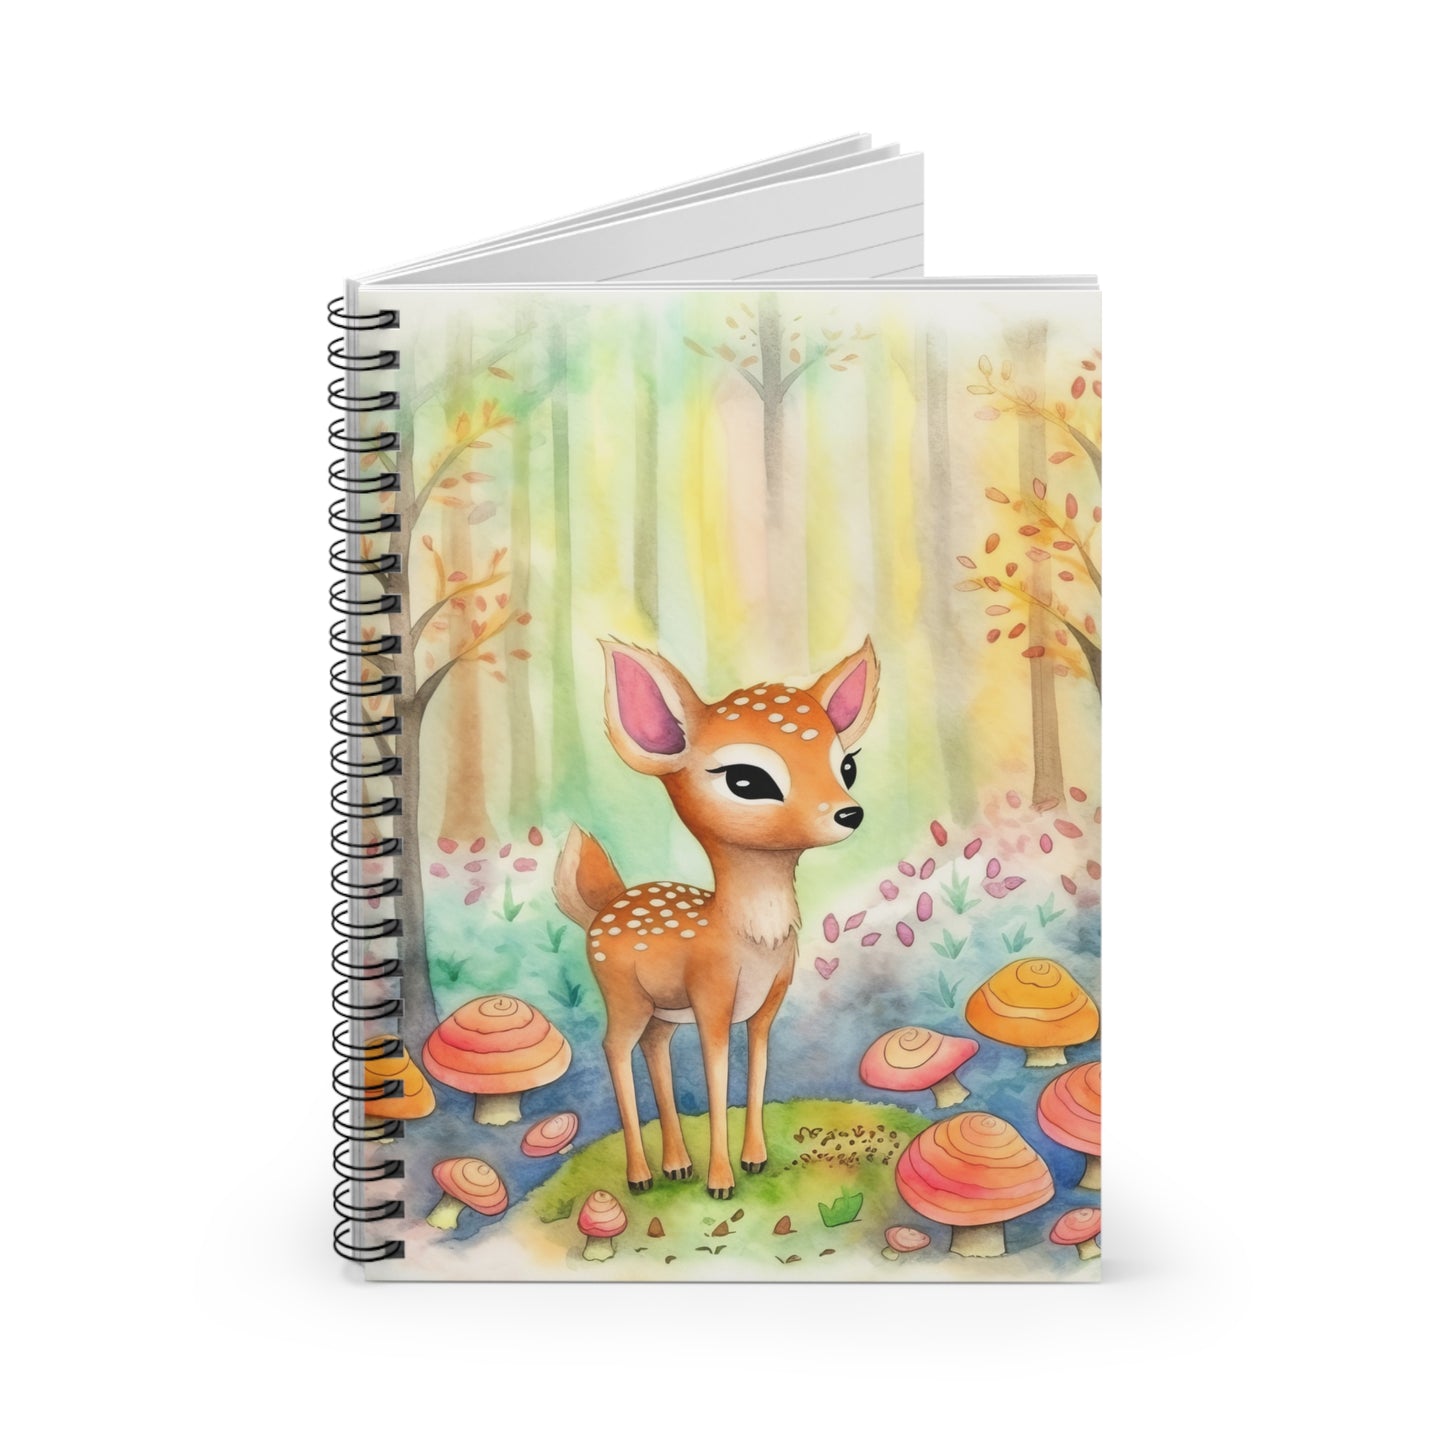 Fawn Spiral Notebook - Ruled Line